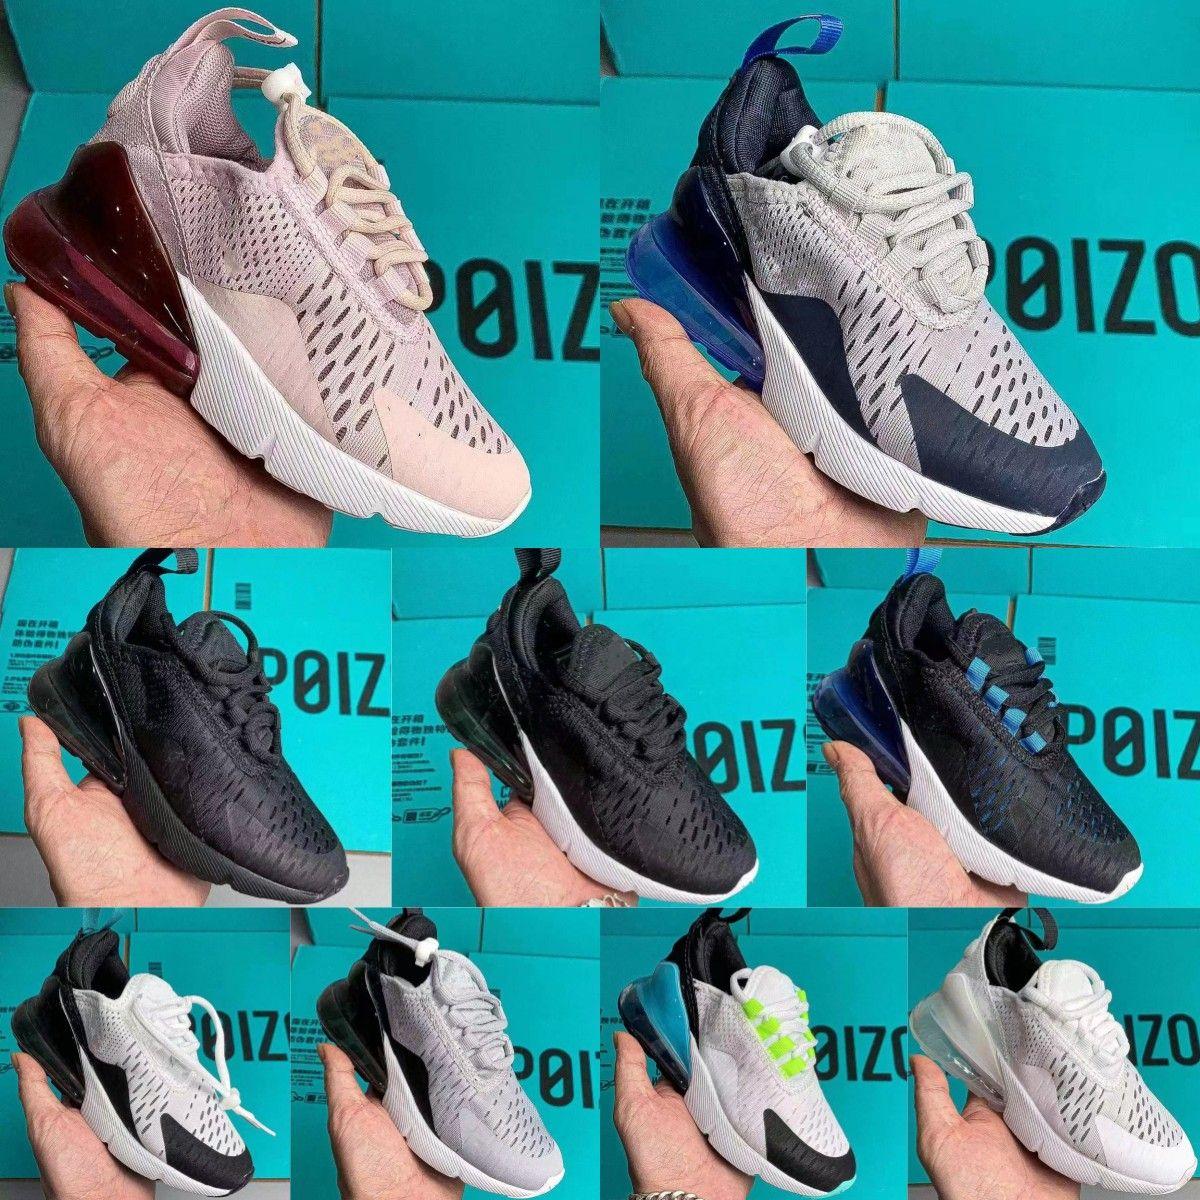 

New Fashion Kids Shoes 270 Designer Toddlers Running Sneakers Boys Childrens 270s Kid shoe max Outdoor Sport Trainers Youth Infants Baby Cas